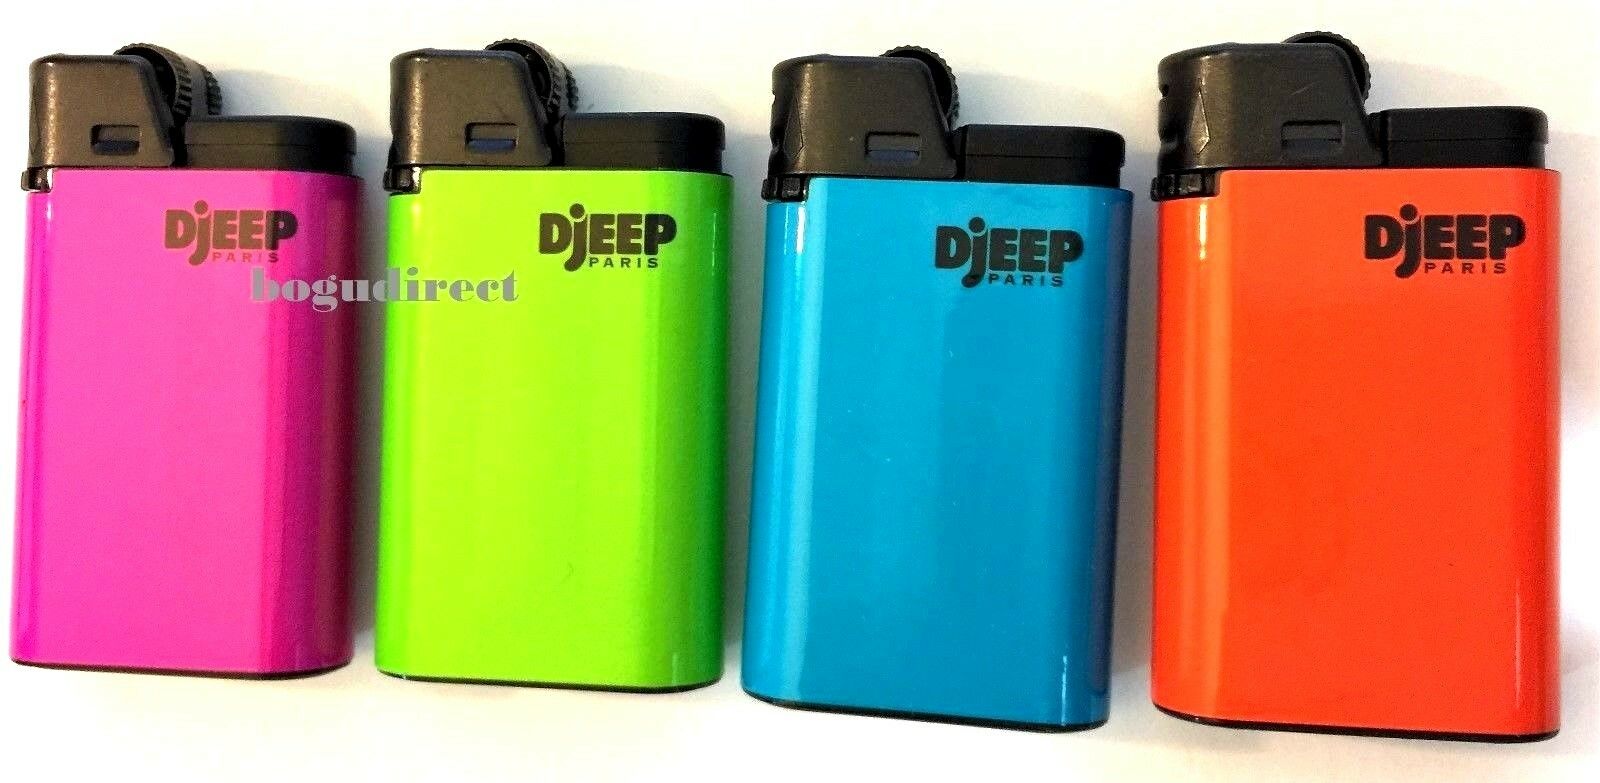 Djeep Large Lighter Hot Body Neon Colors 4 Pcs Made In France